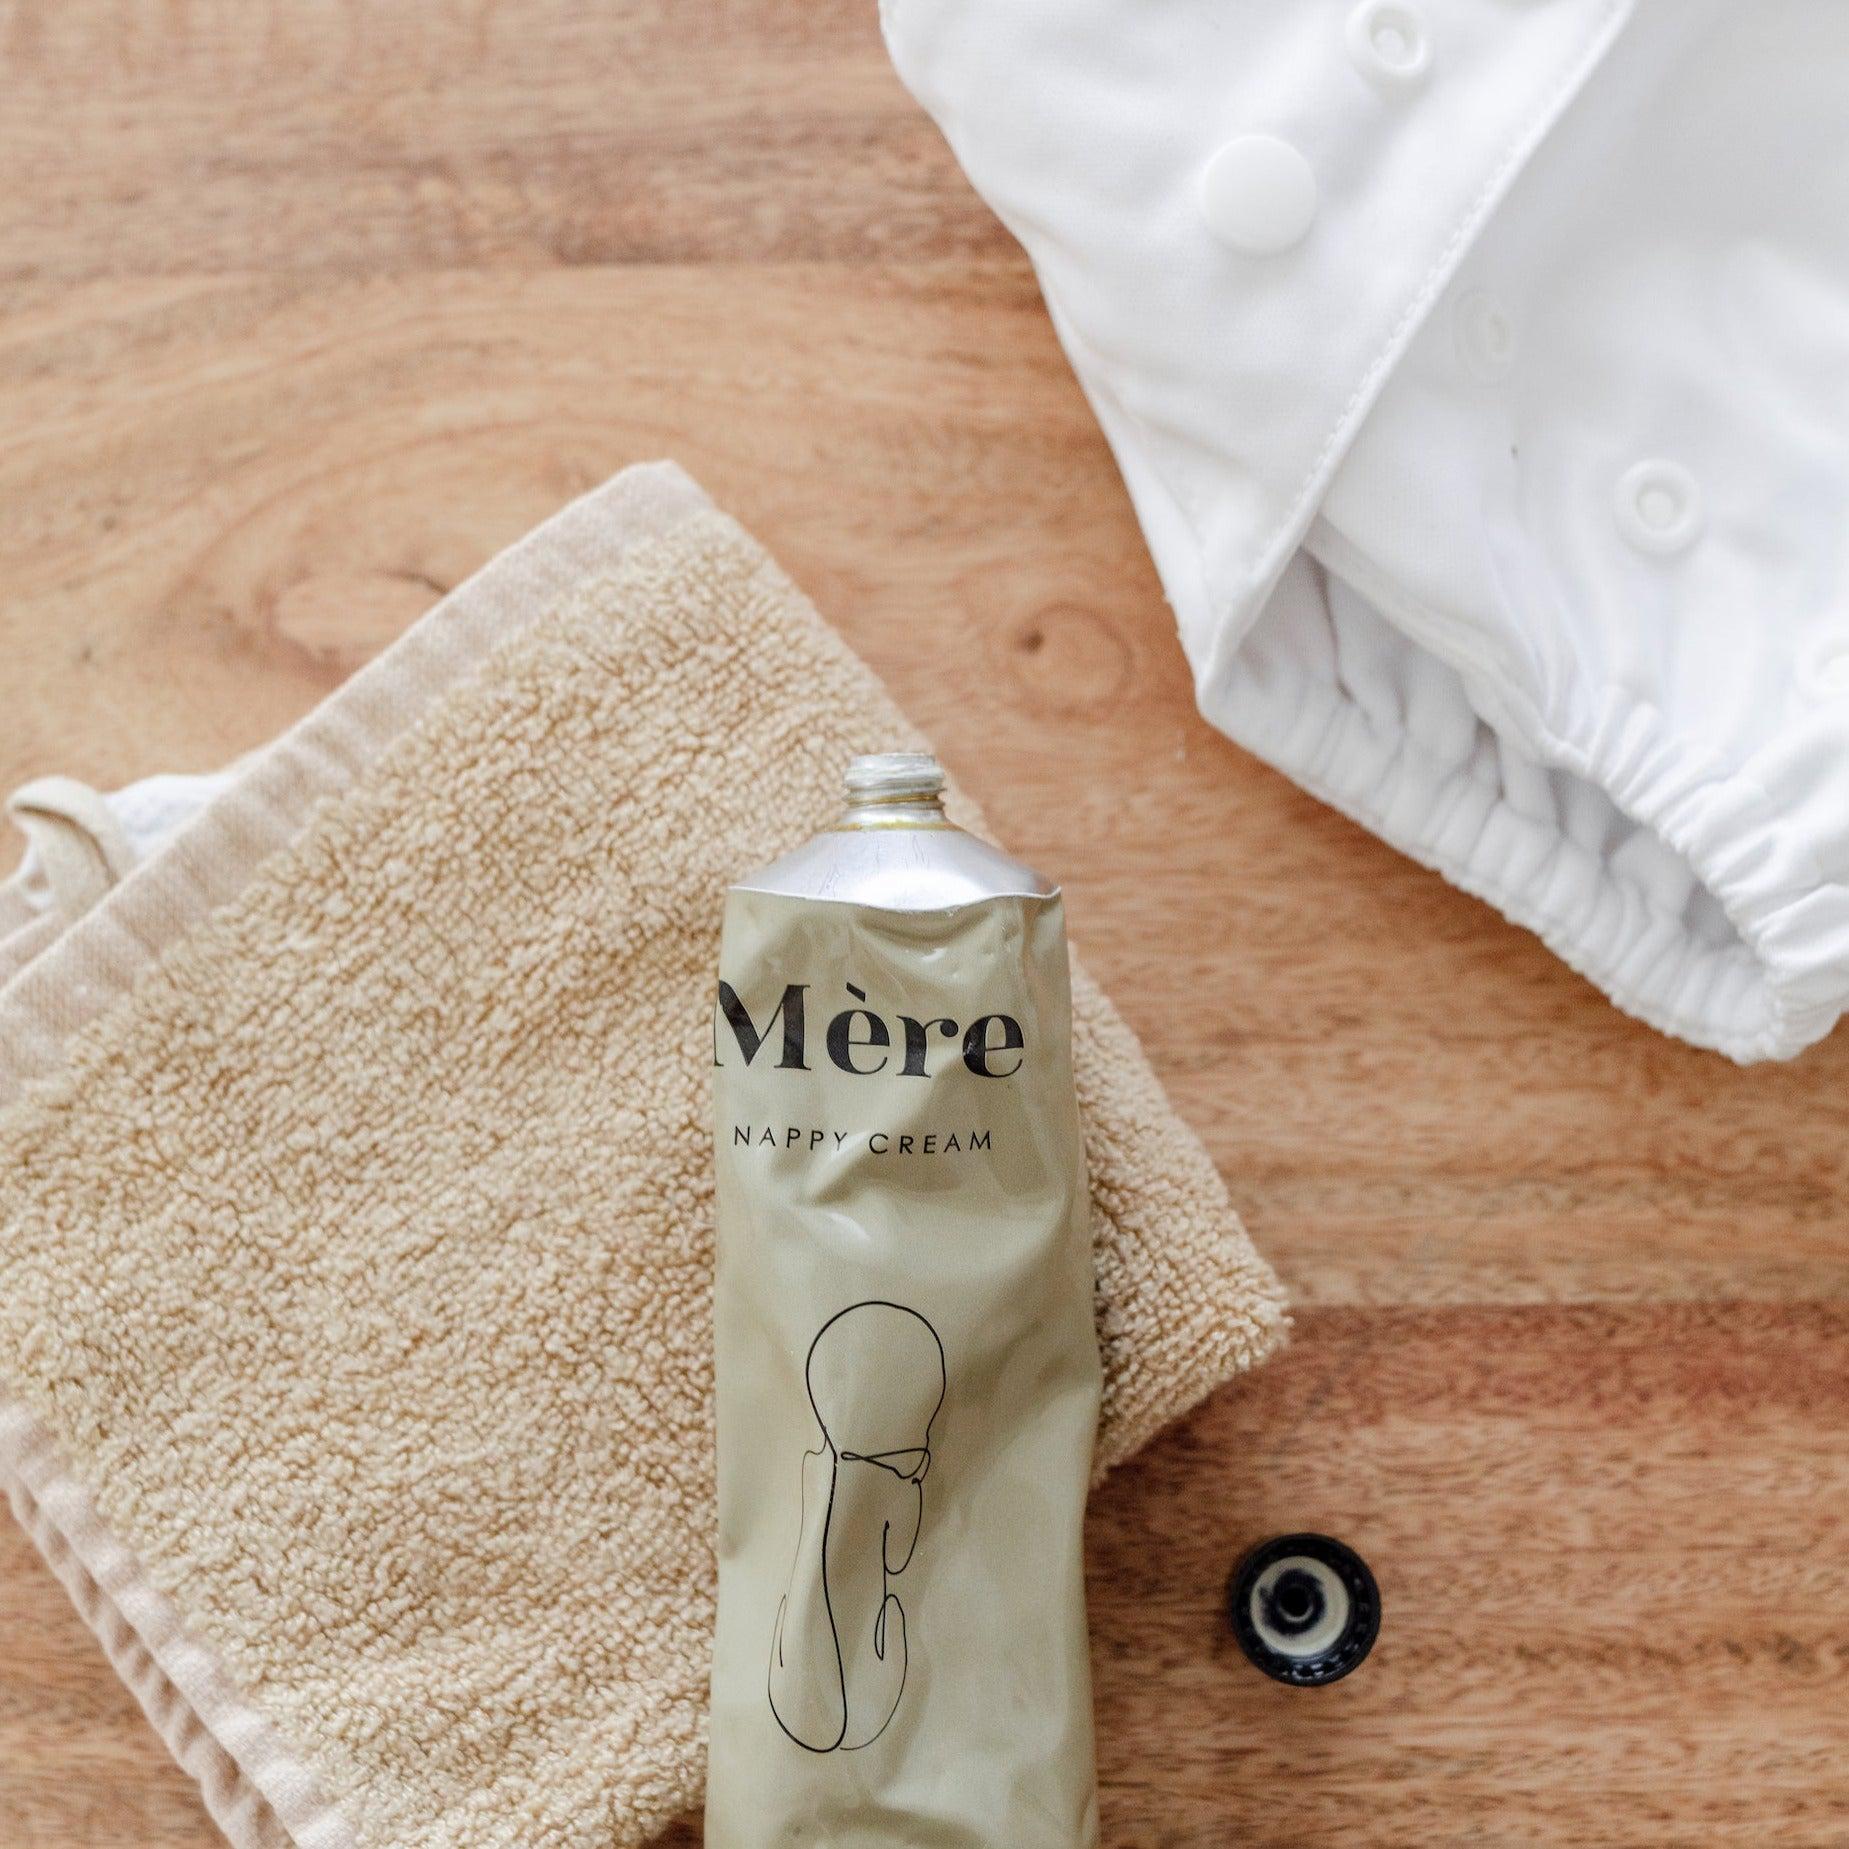 A tube of Mère Nappy Cream and a towel on a wooden table.